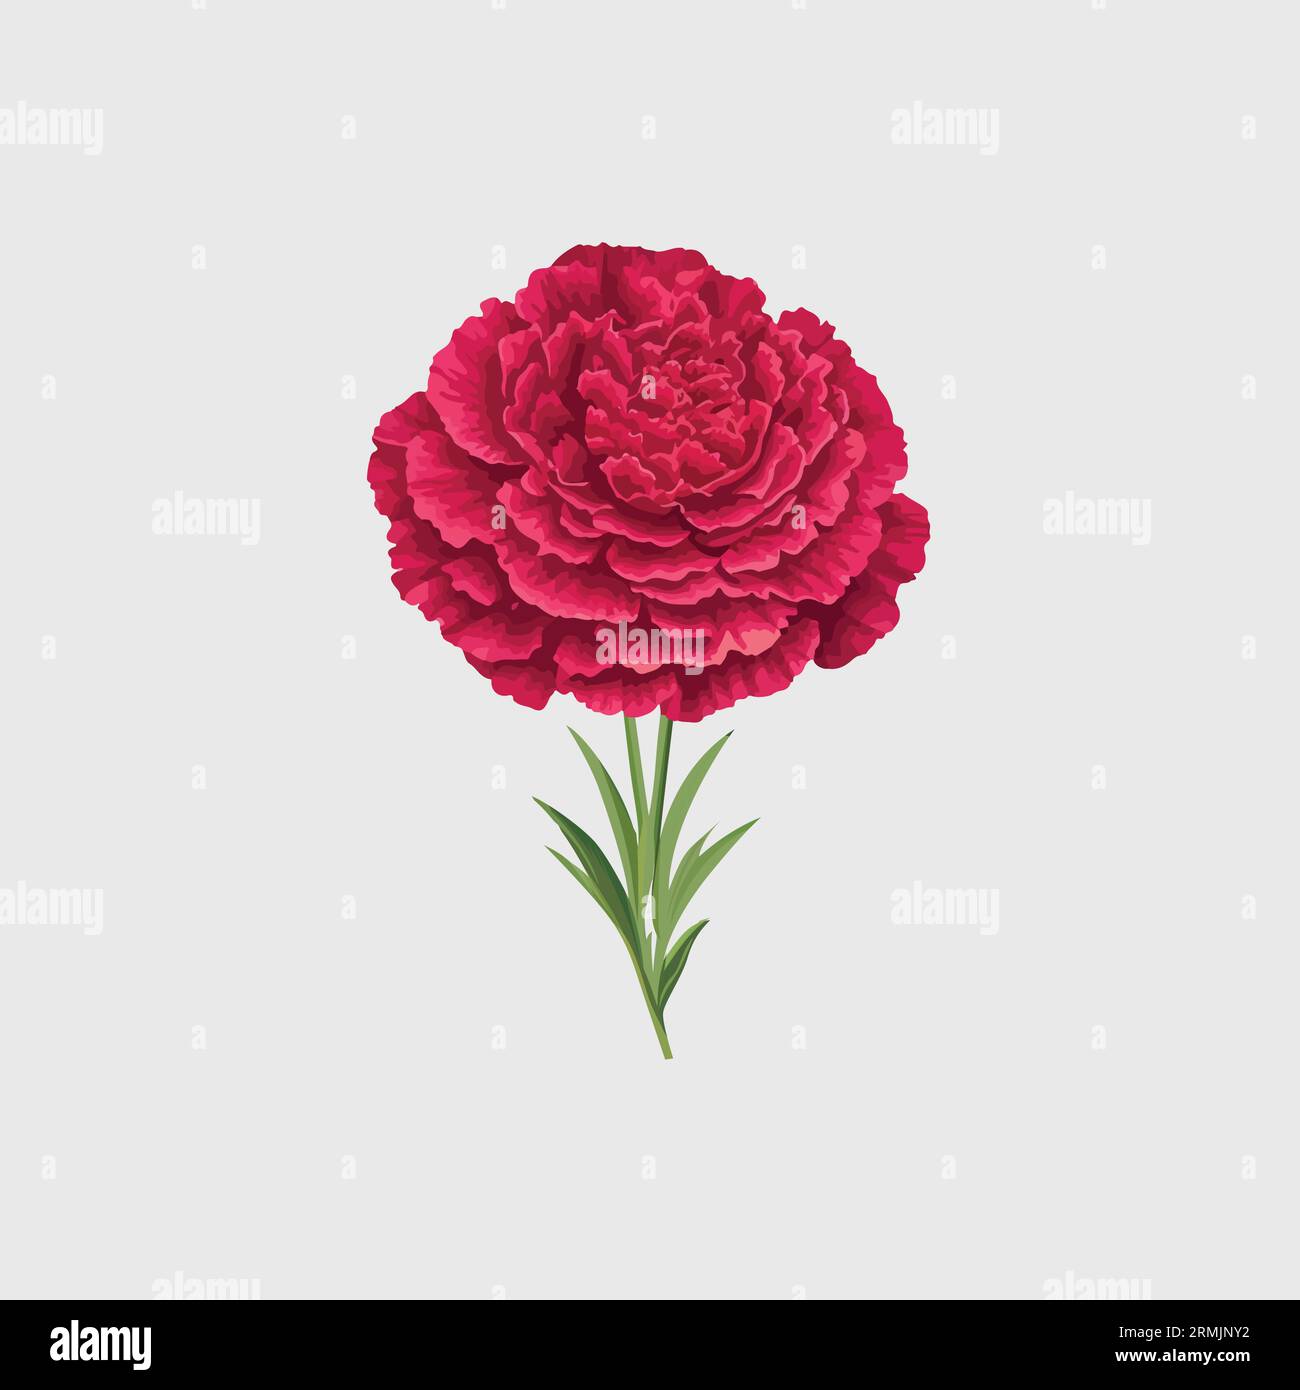 Vector floral bouquet illustration featuring a solitary carnation flower Stock Vector